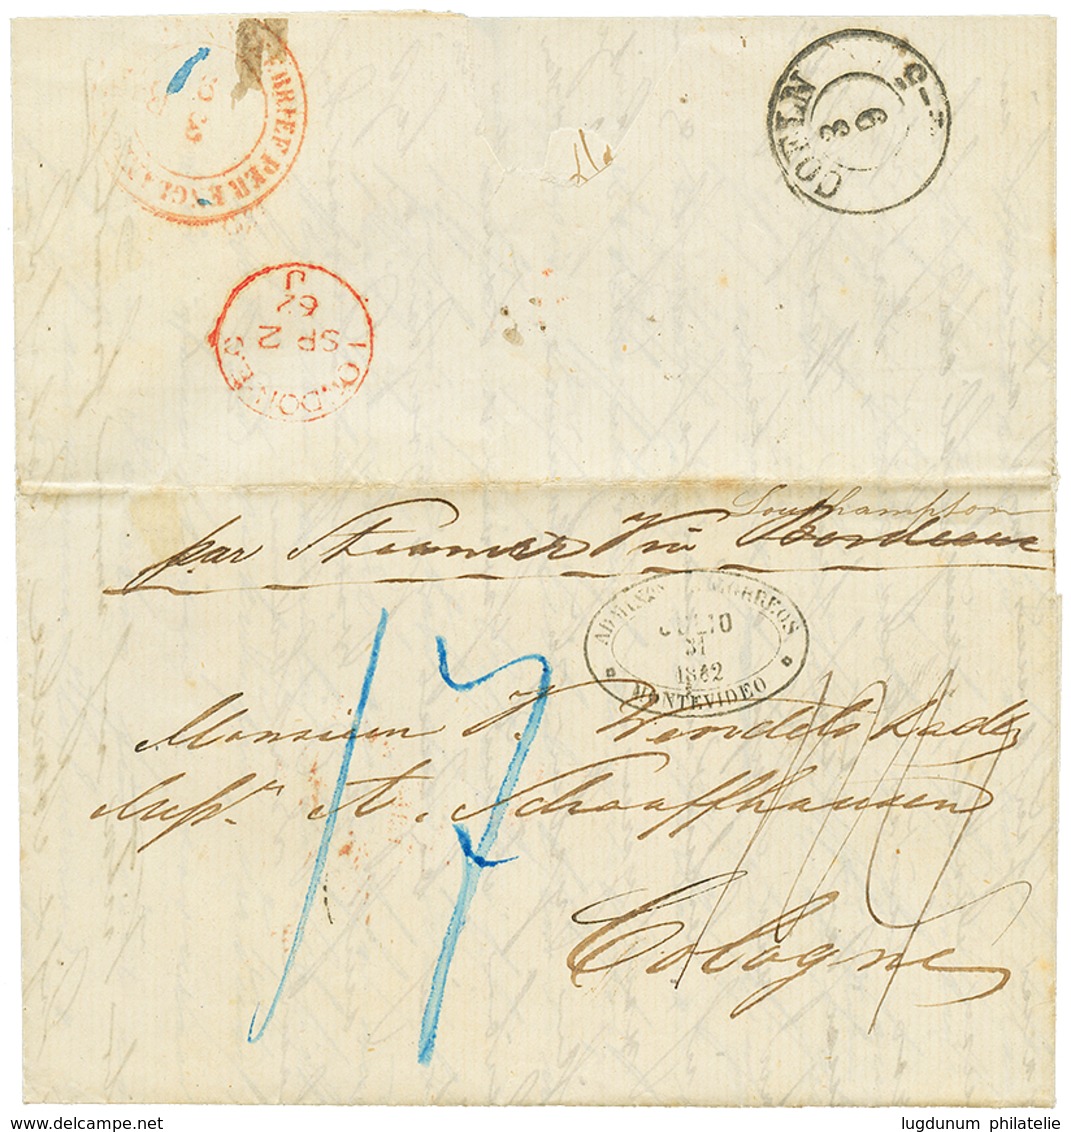 1417 "NUEVA MEHLEM" : 1862 ADMON CORREOS MONTEVIDEO On Entire Letter From NUEVA MEHLEM To GERMANY. Vvf. - Uruguay